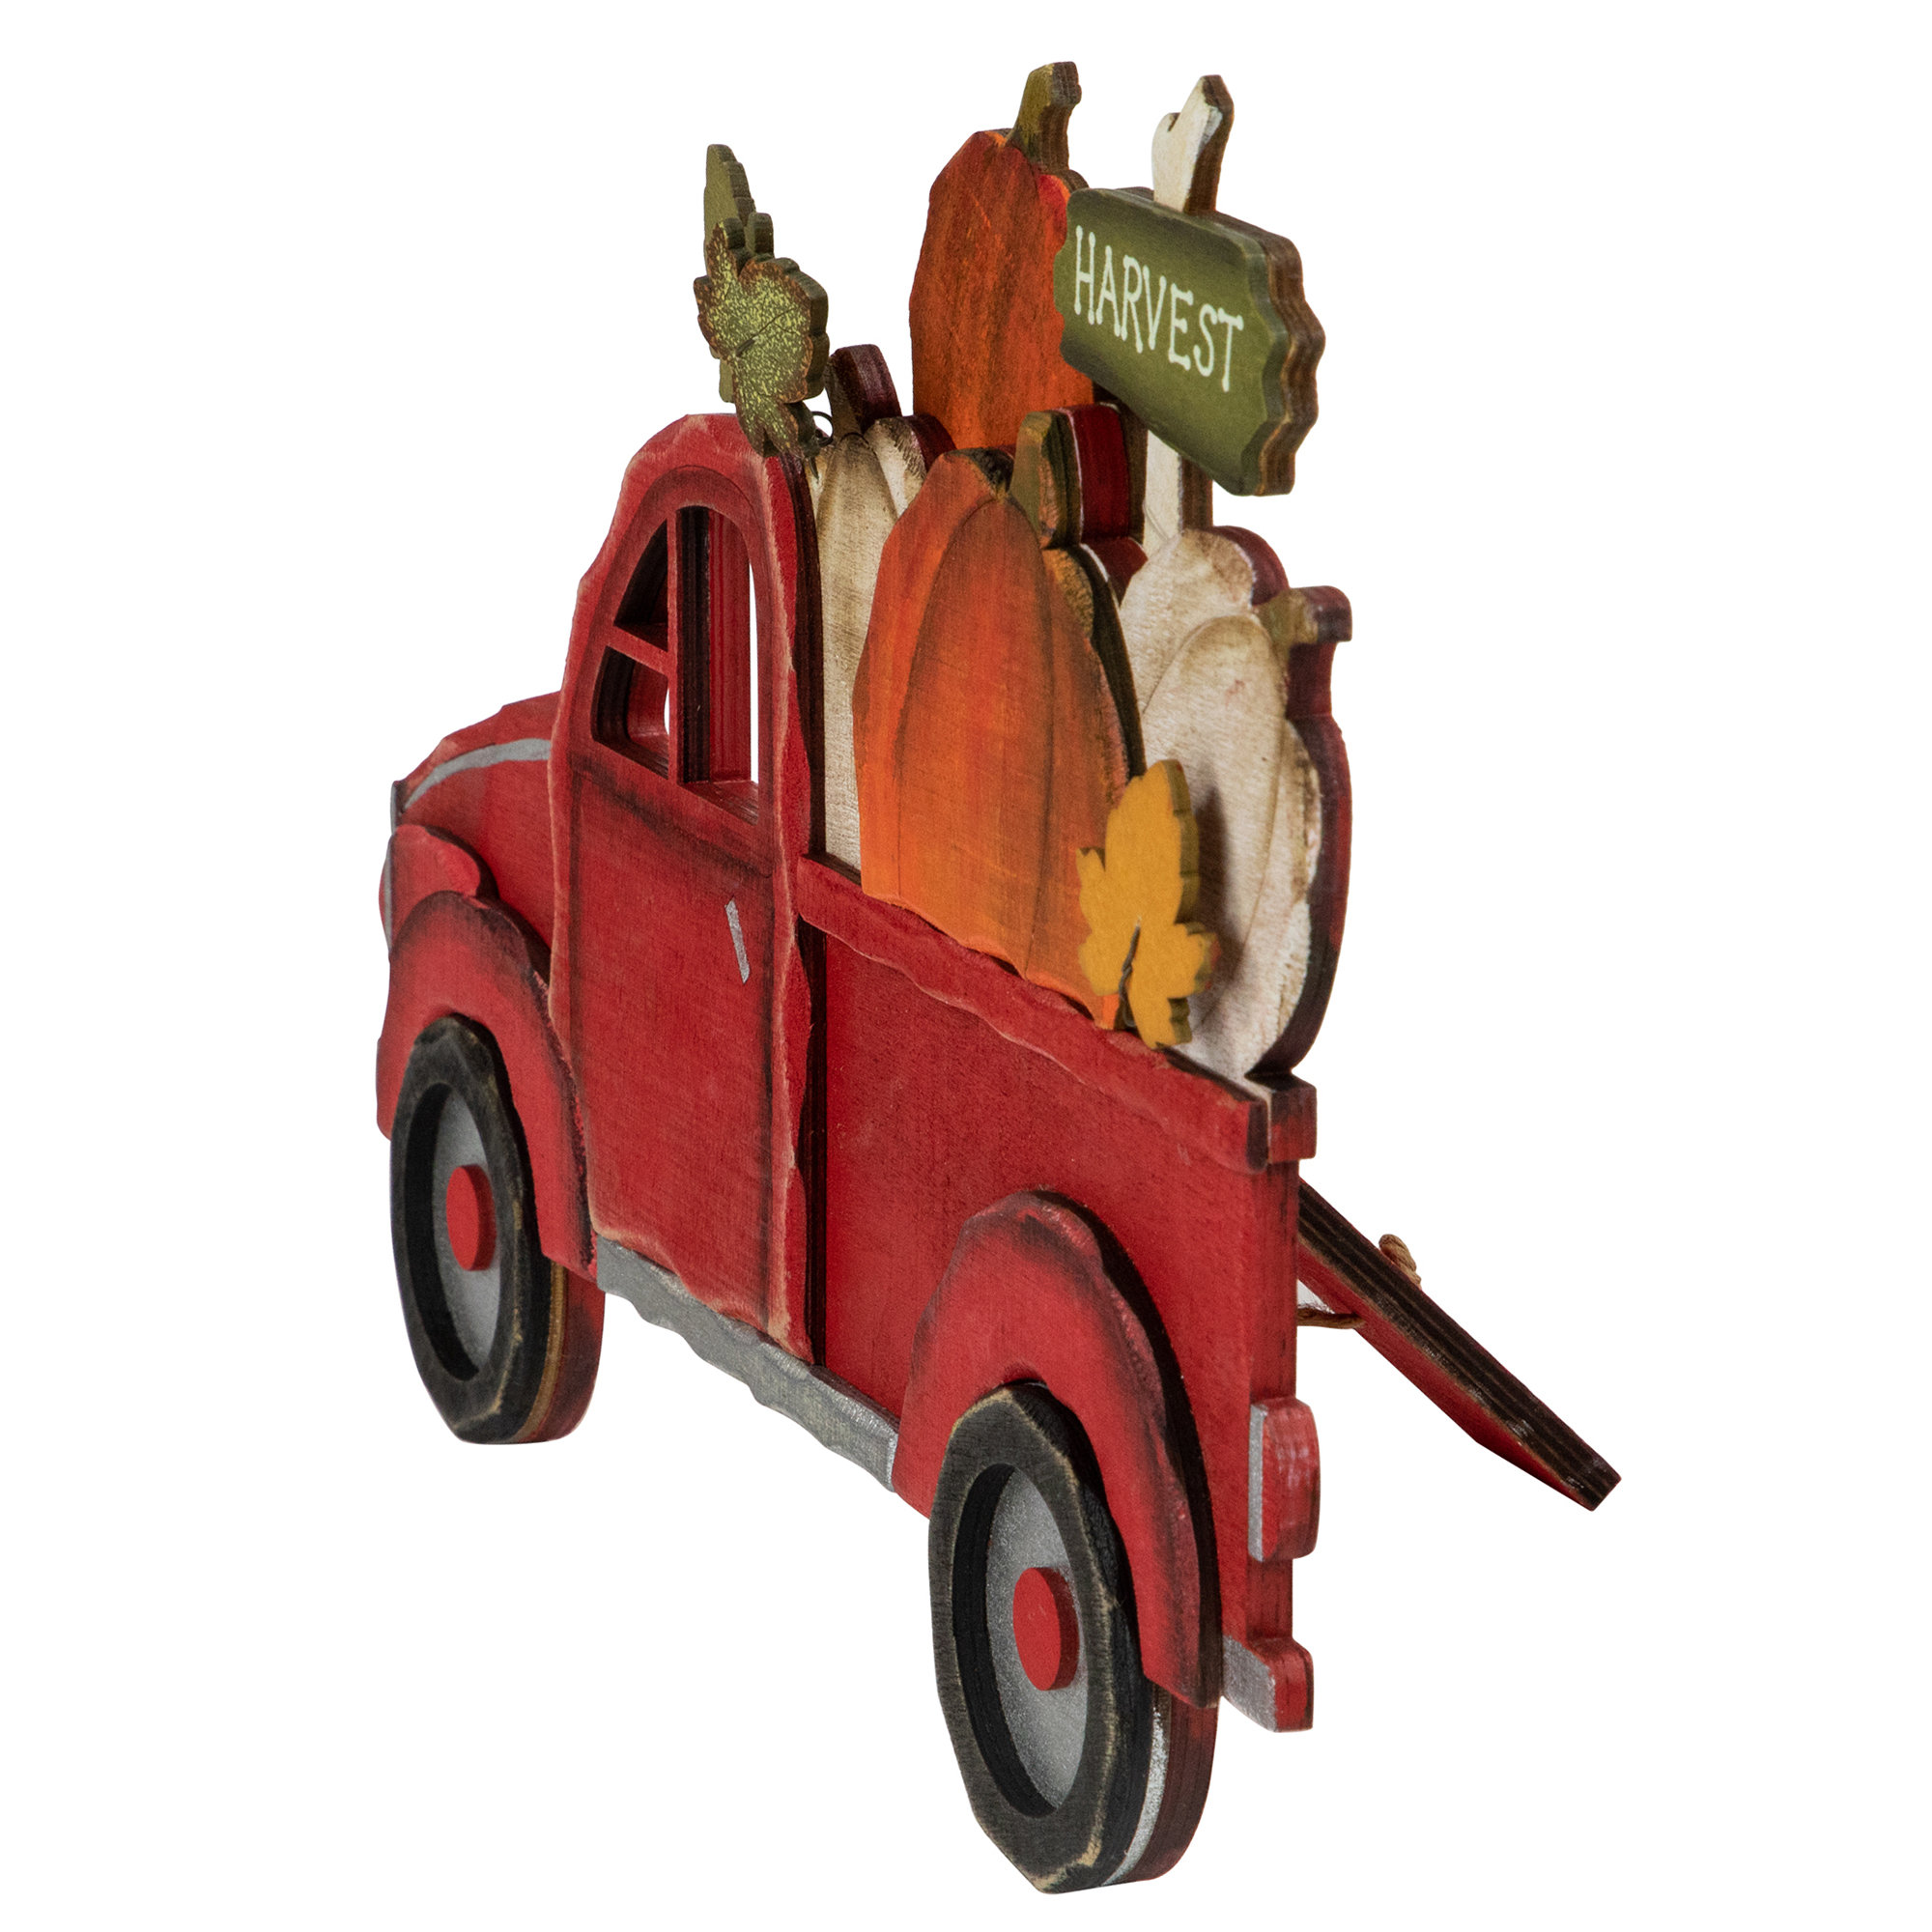 Fall Pumpkins in a Red Truck Hanging Kitchen Towel With 